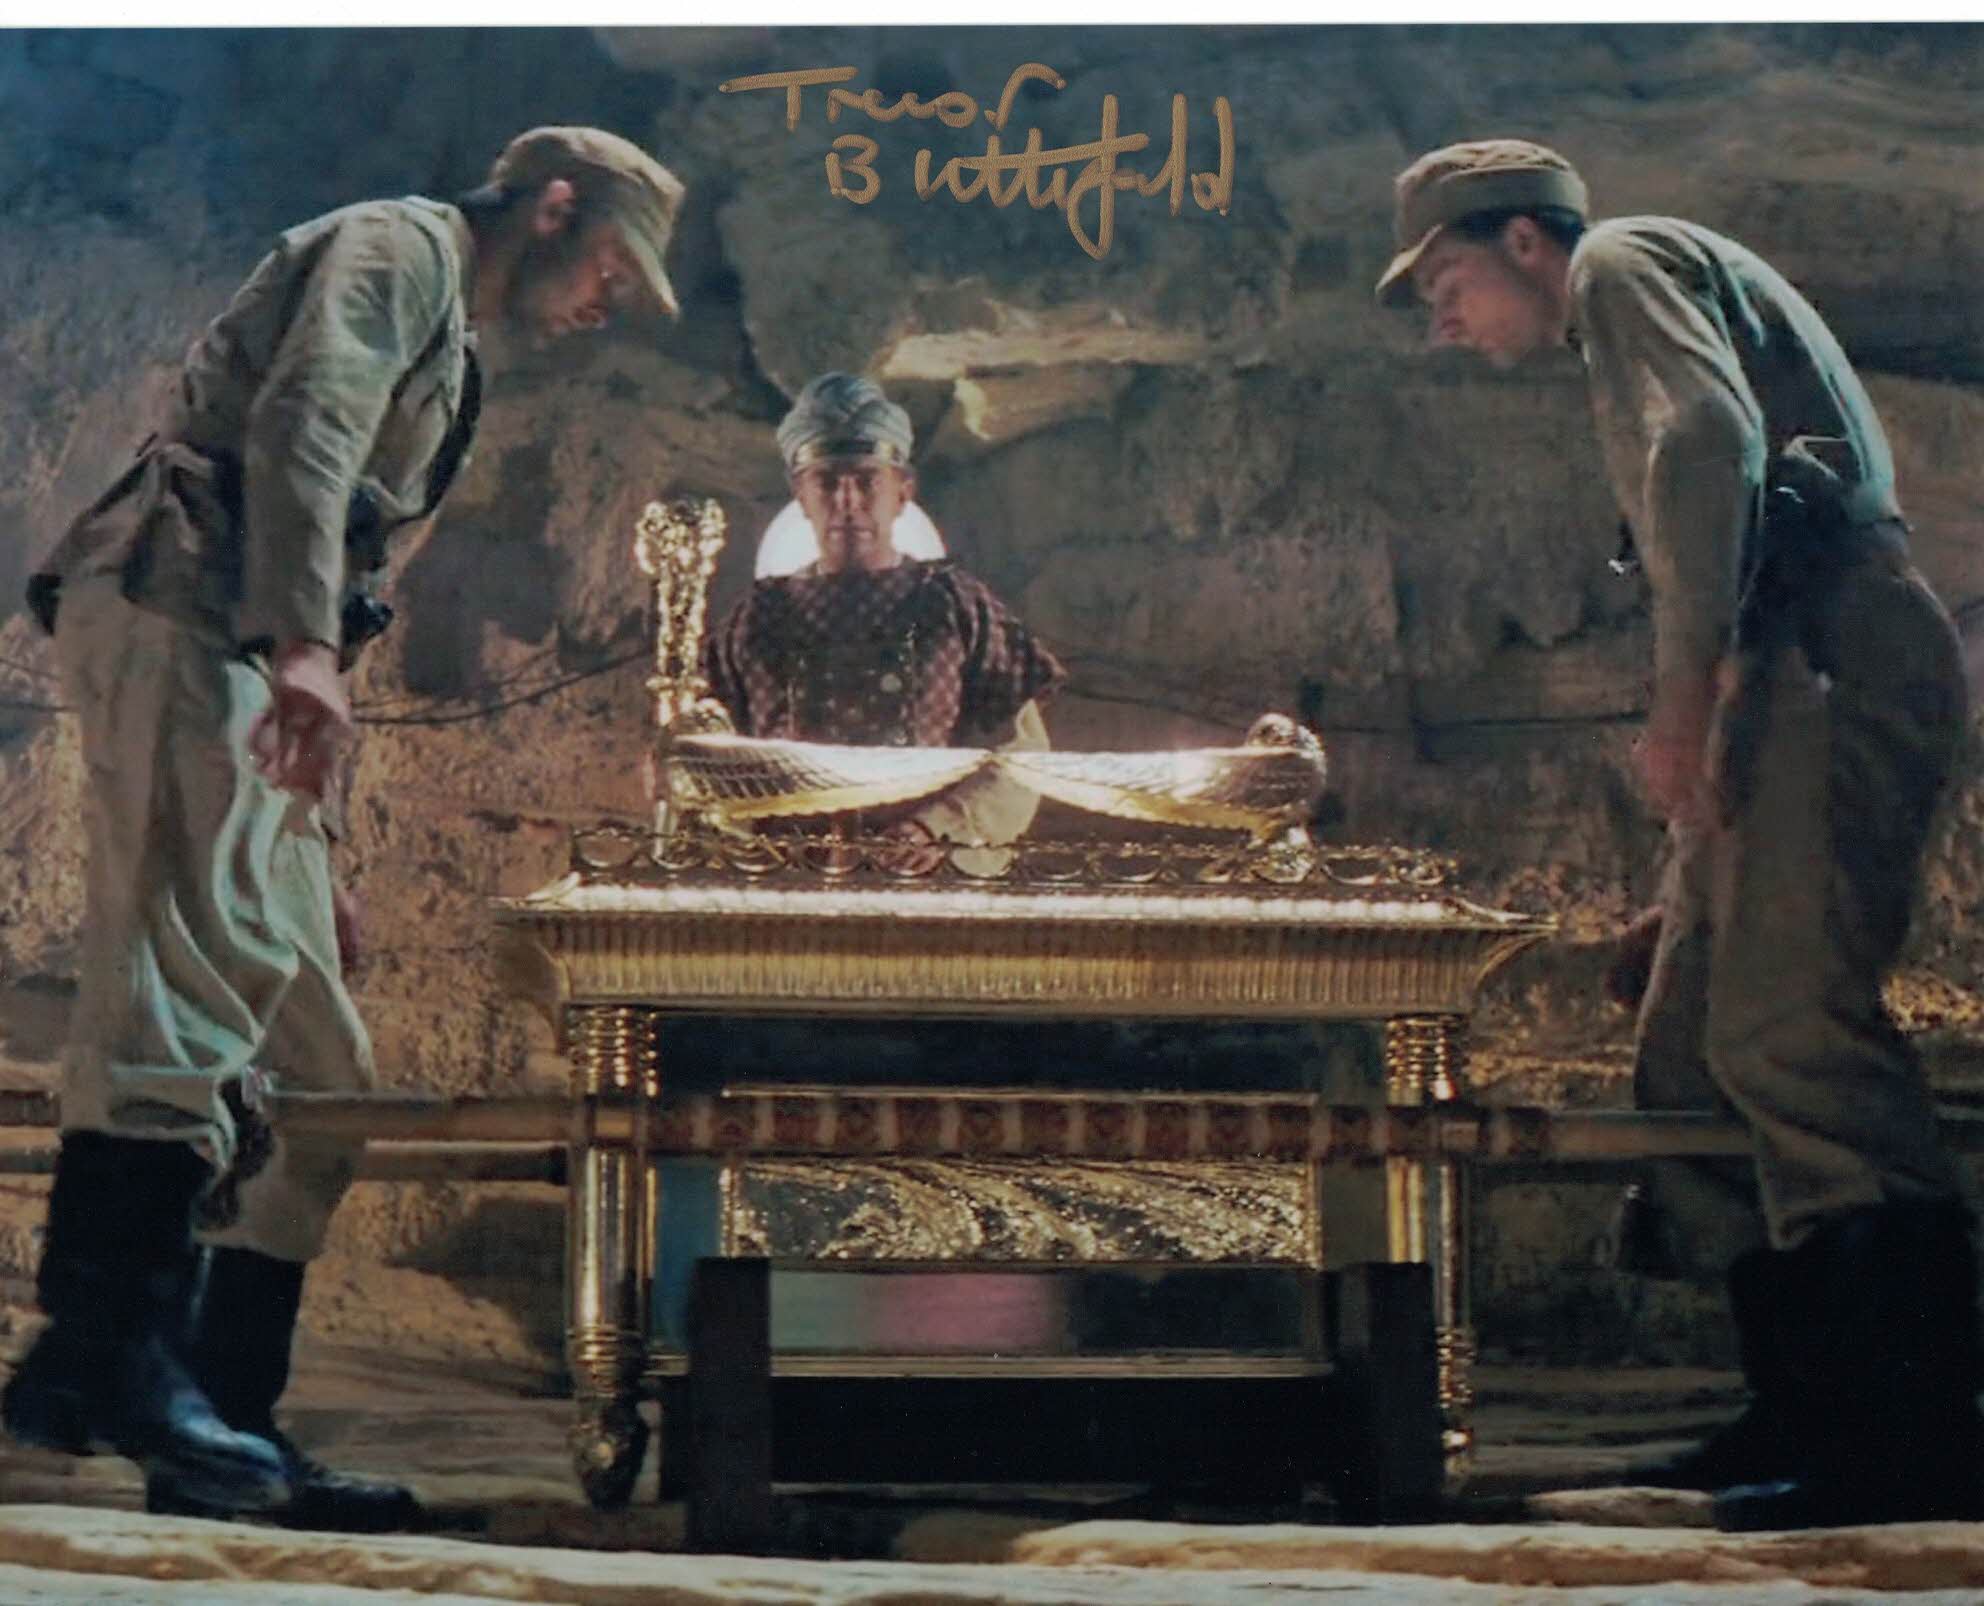 TREVOR BUTTERFIELD - Ark Carrier in Indiana Jones & The Raiders of The Lost Arks  hand signed 10 x 8 photo